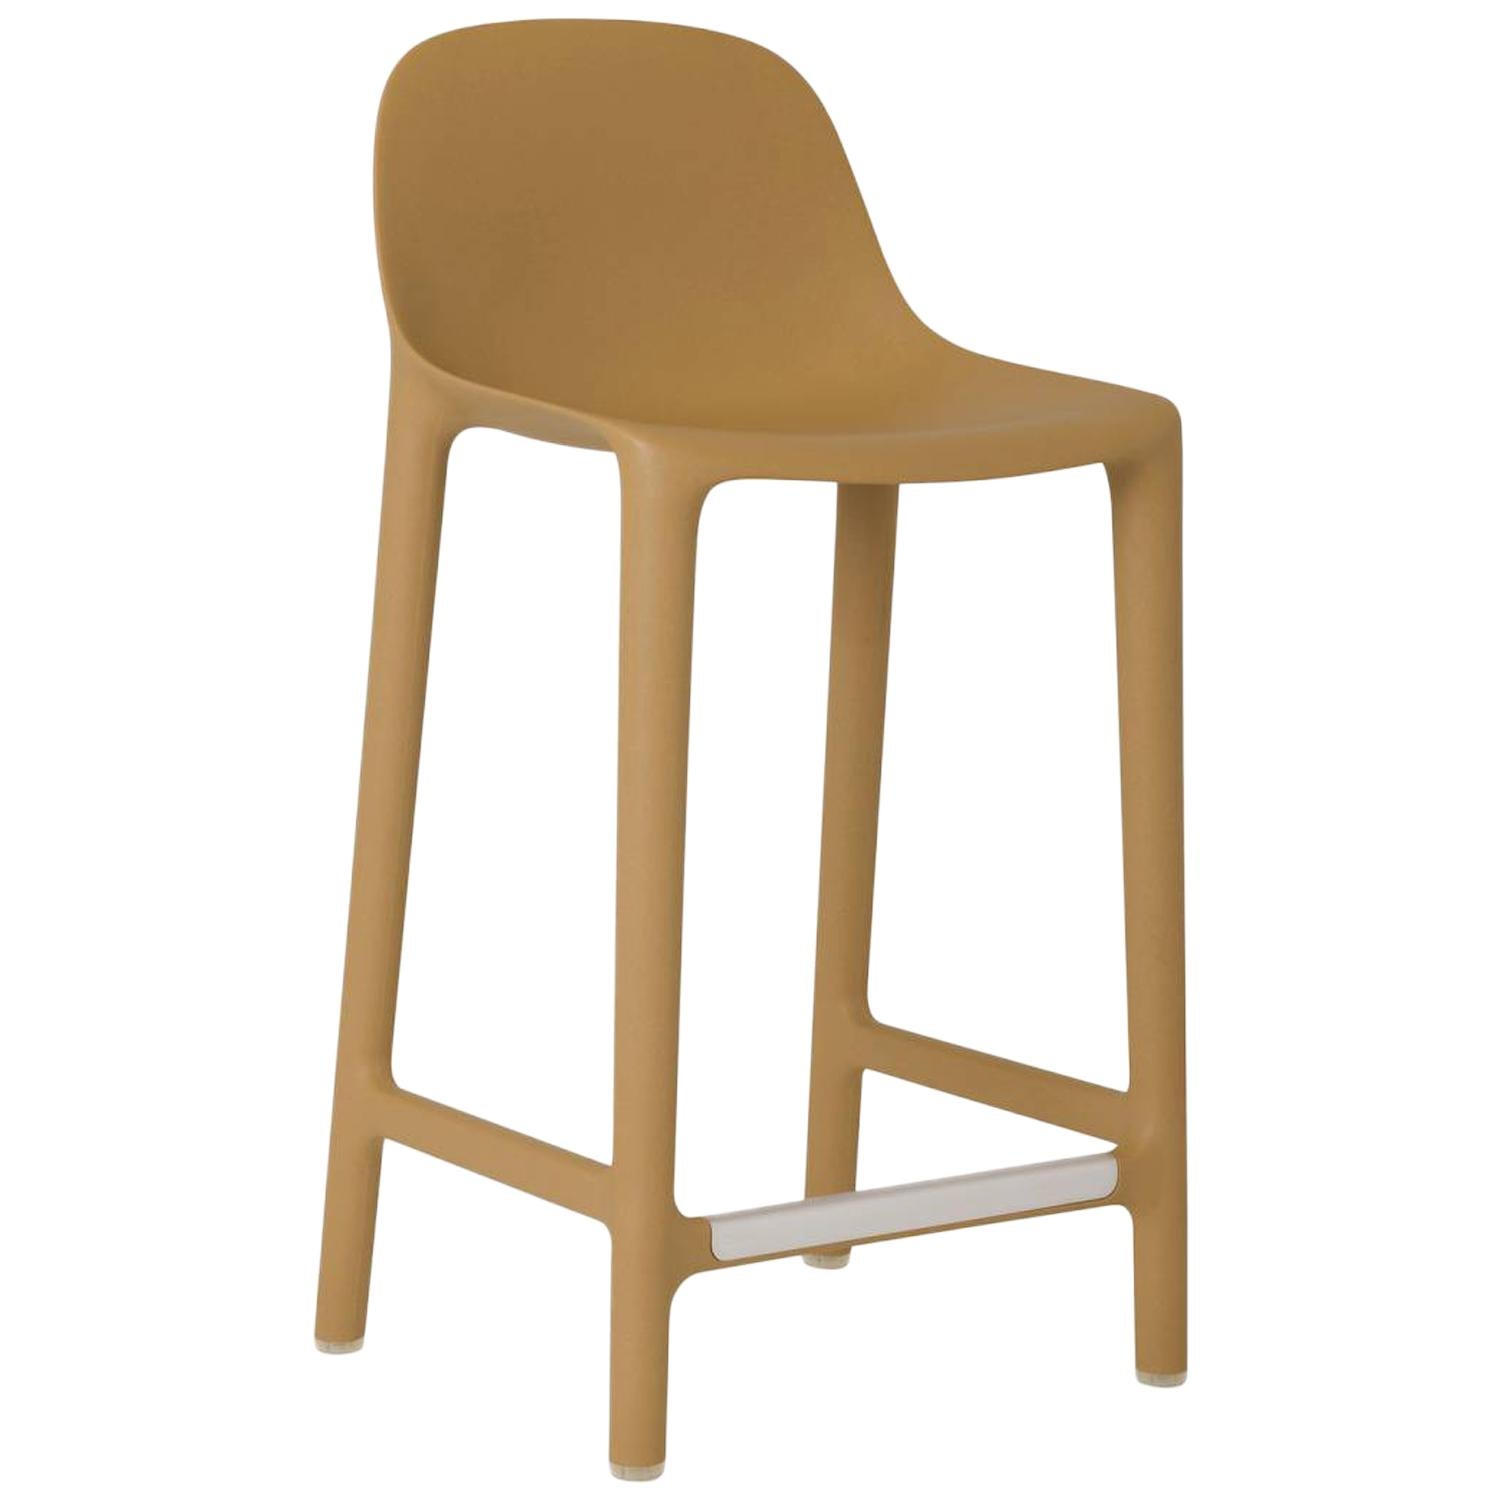 Emeco Broom Counter Stool in Tan by Philippe Starck For Sale